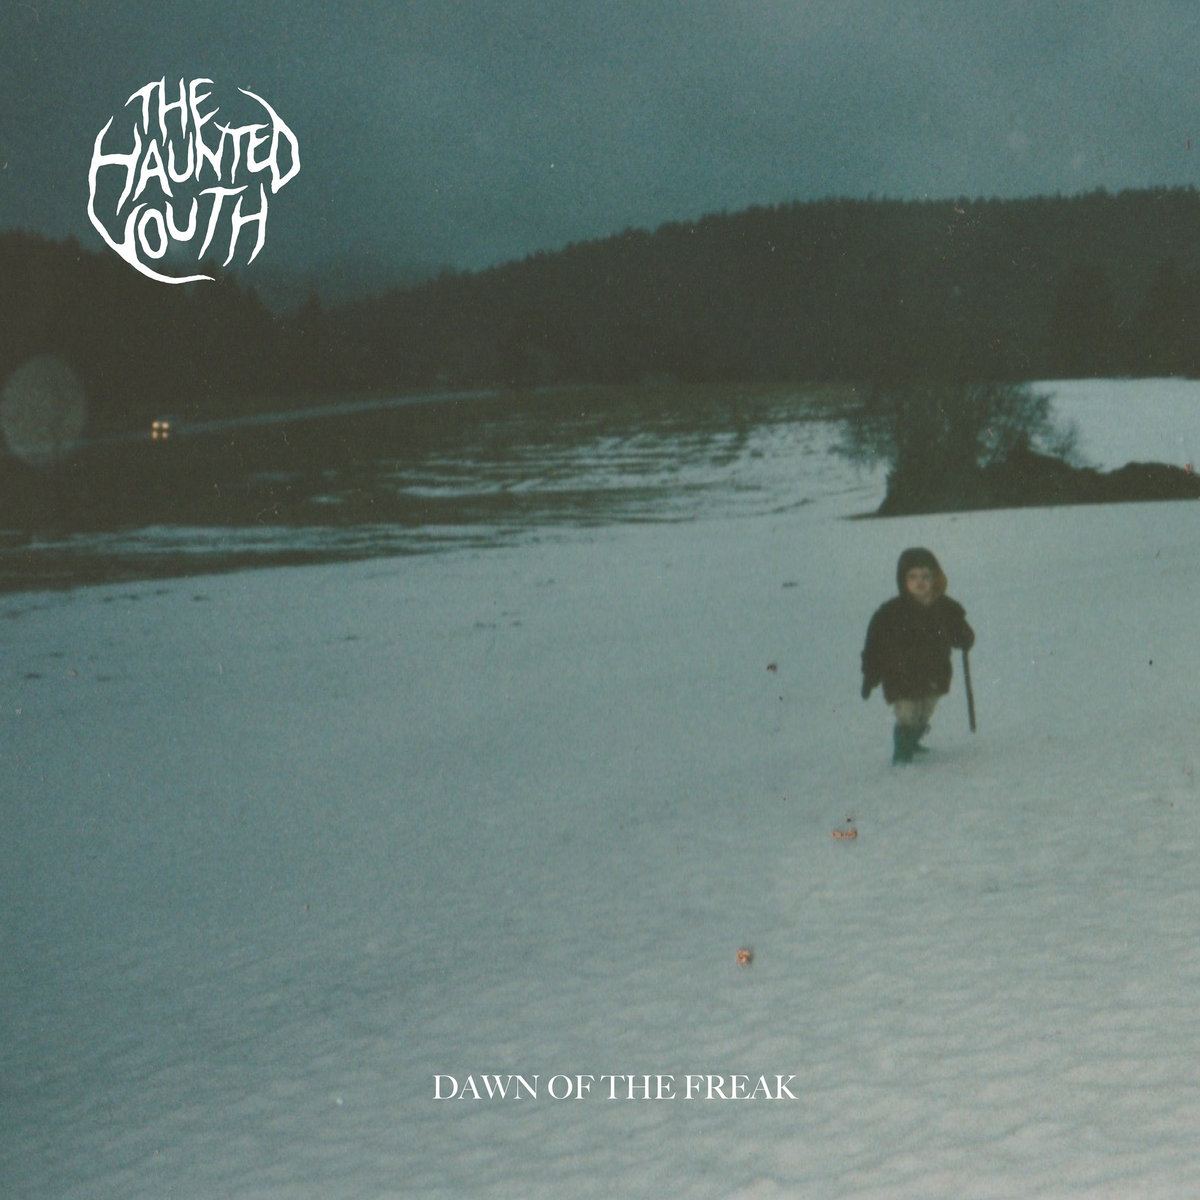 The Haunted Youth "Dawn Of The Freak" LP